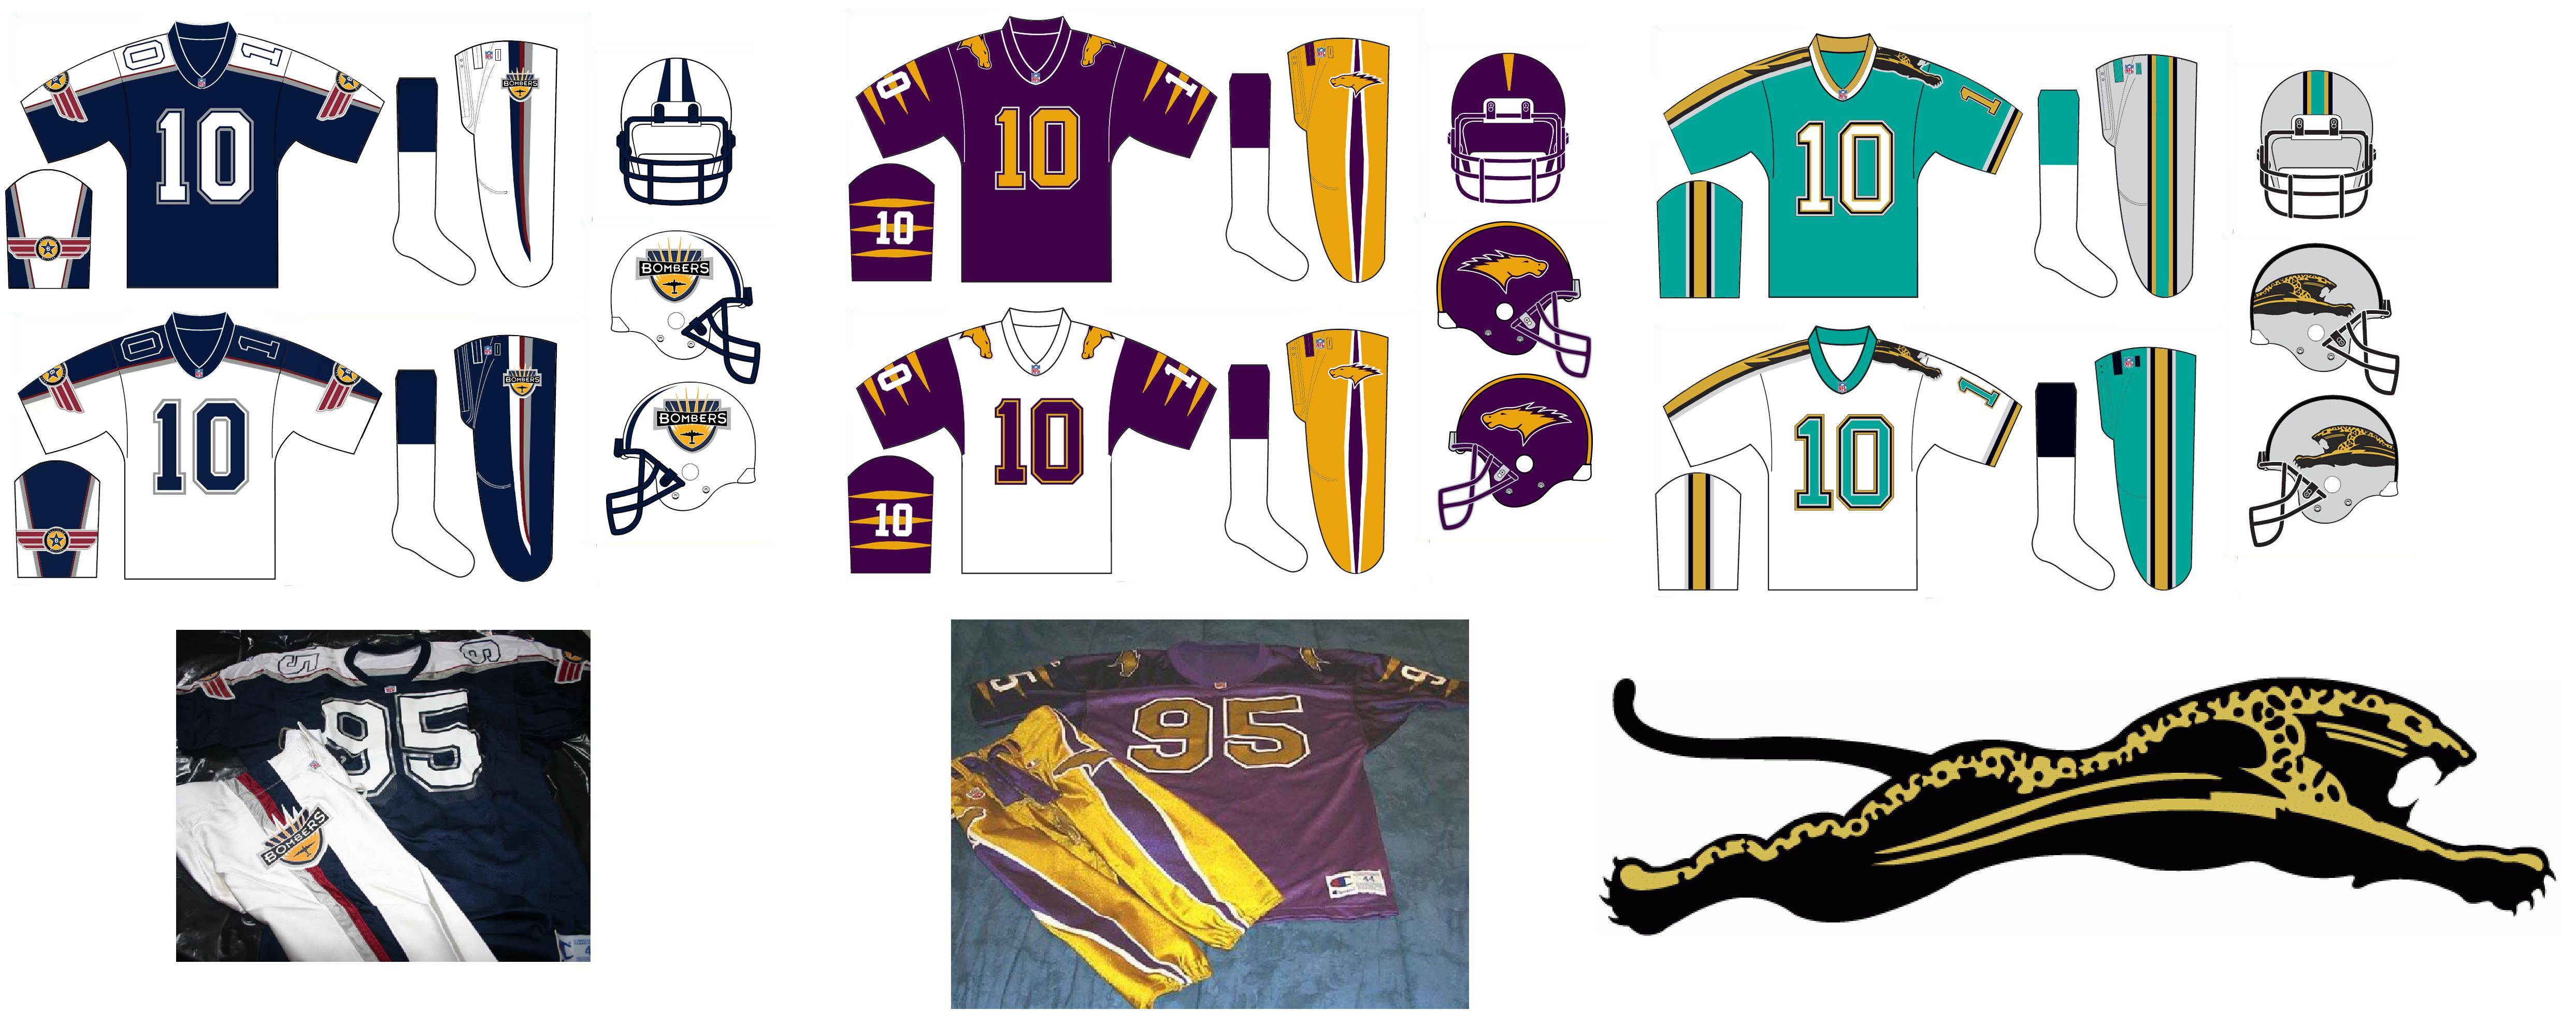 Jacksonville Jaguars Original Logo - Uniforms for 1995's proposed Baltimore Bombers and St. Louis ...